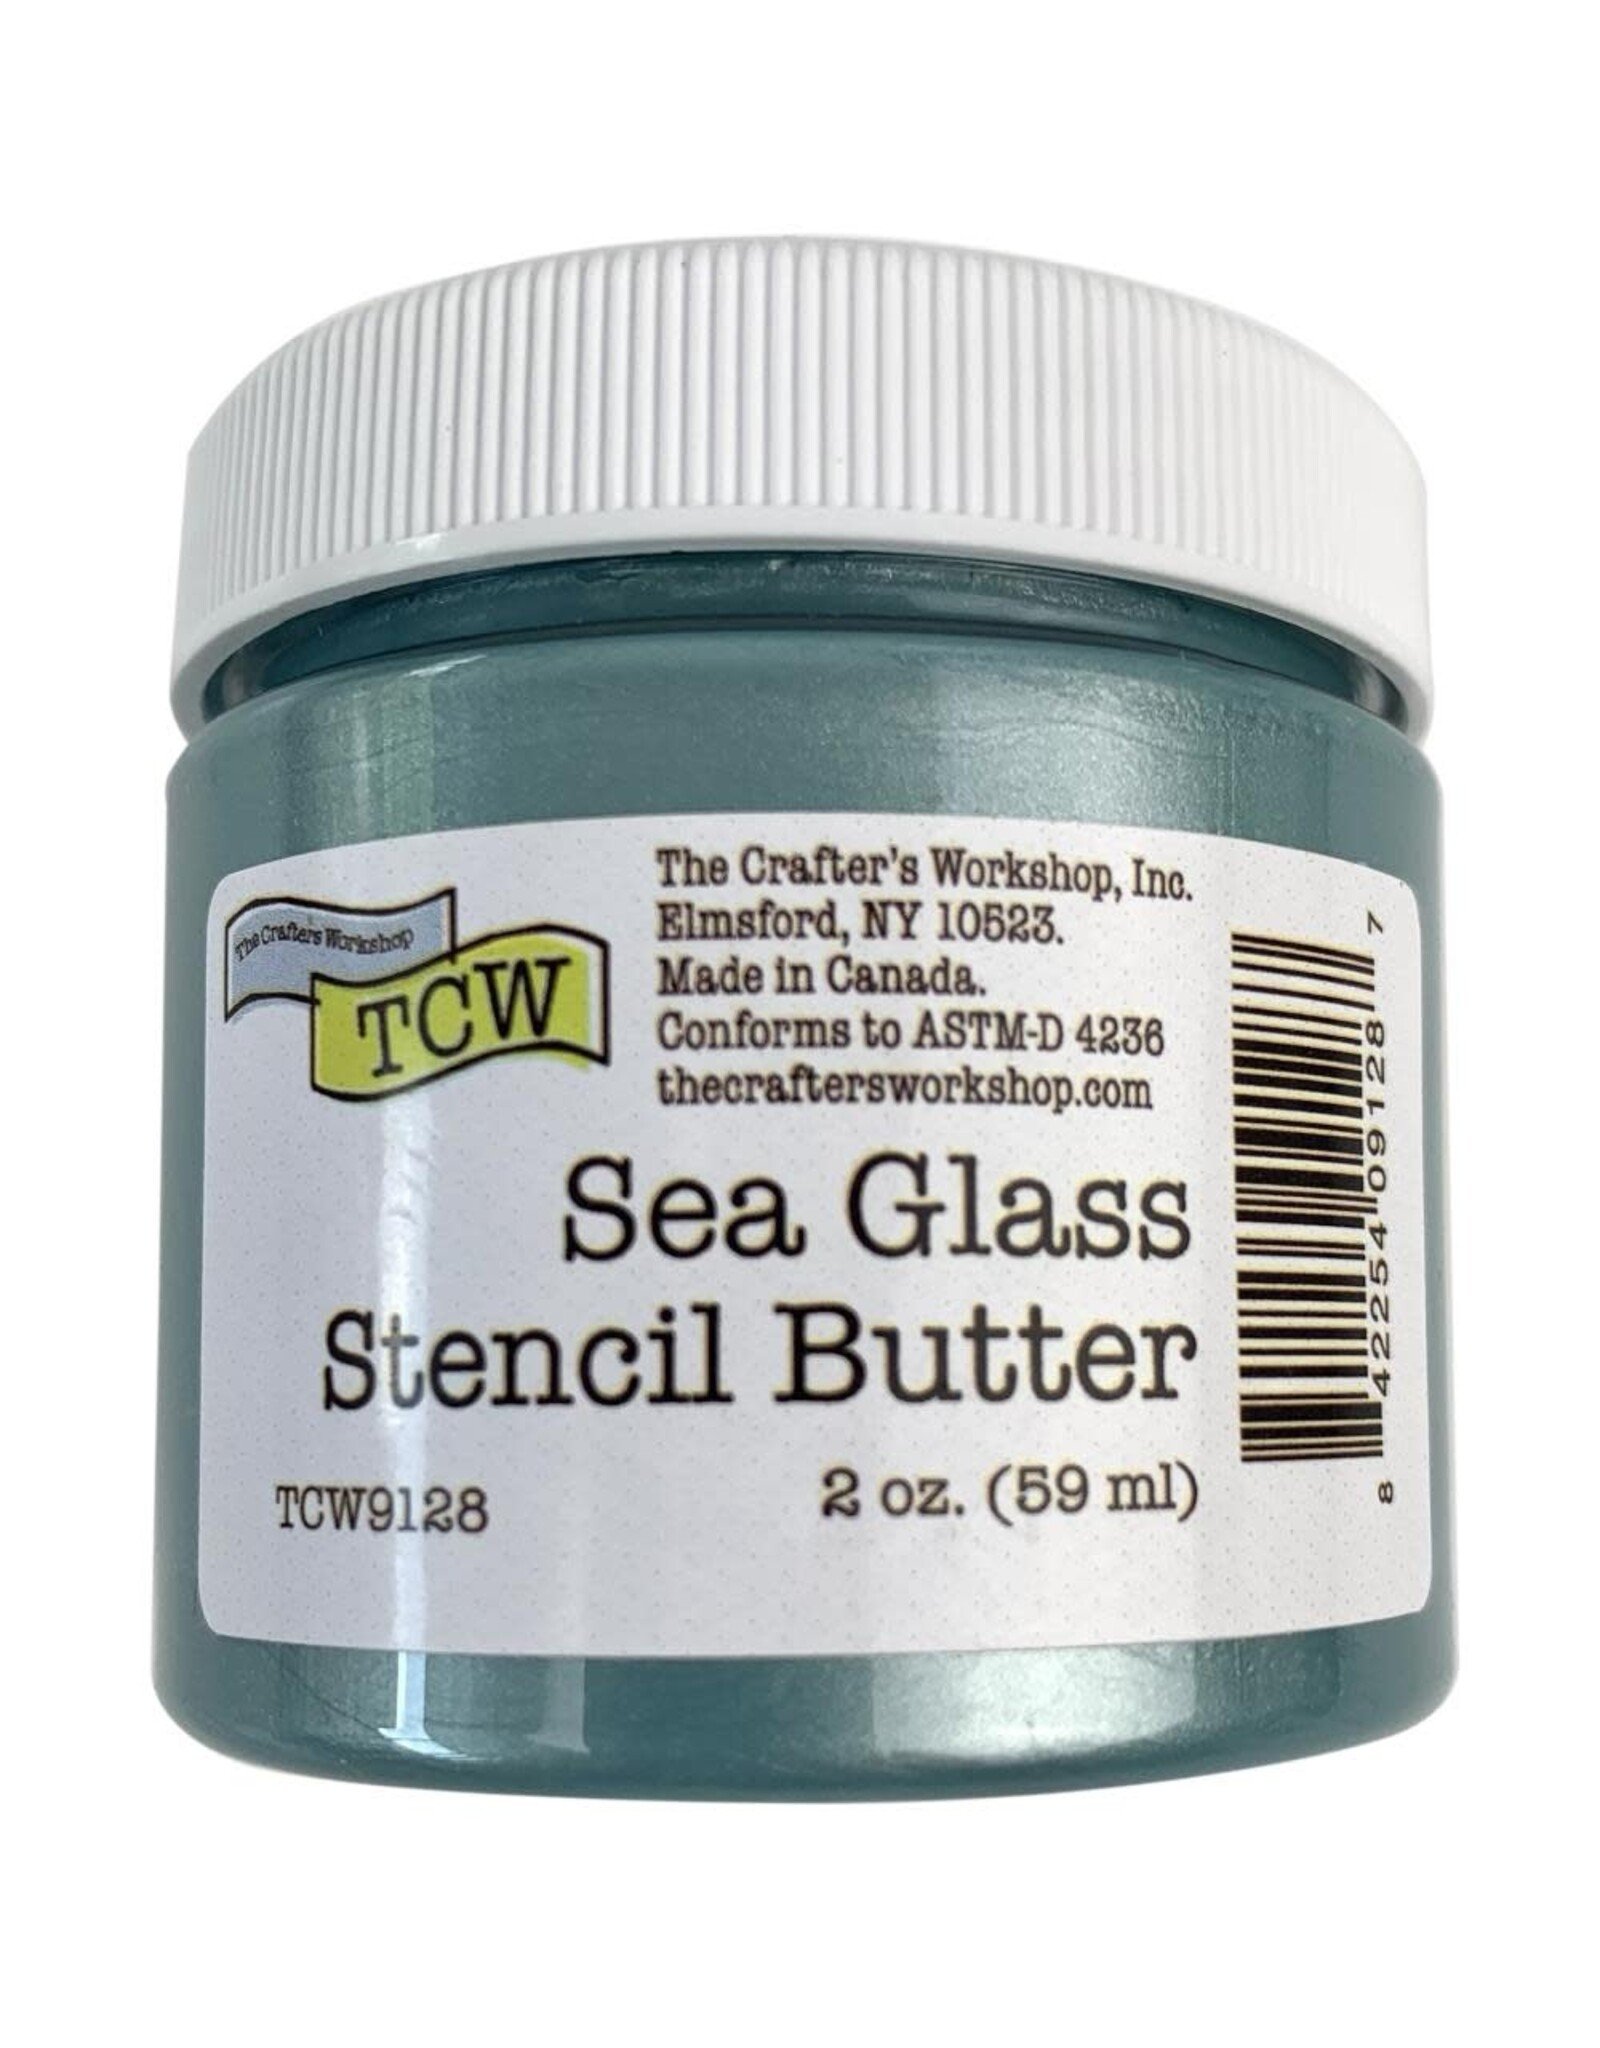 CRAFTERS WORKSHOP THE CRAFTERS WORKSHOP SEA GLASS STENCIL BUTTER 2oz